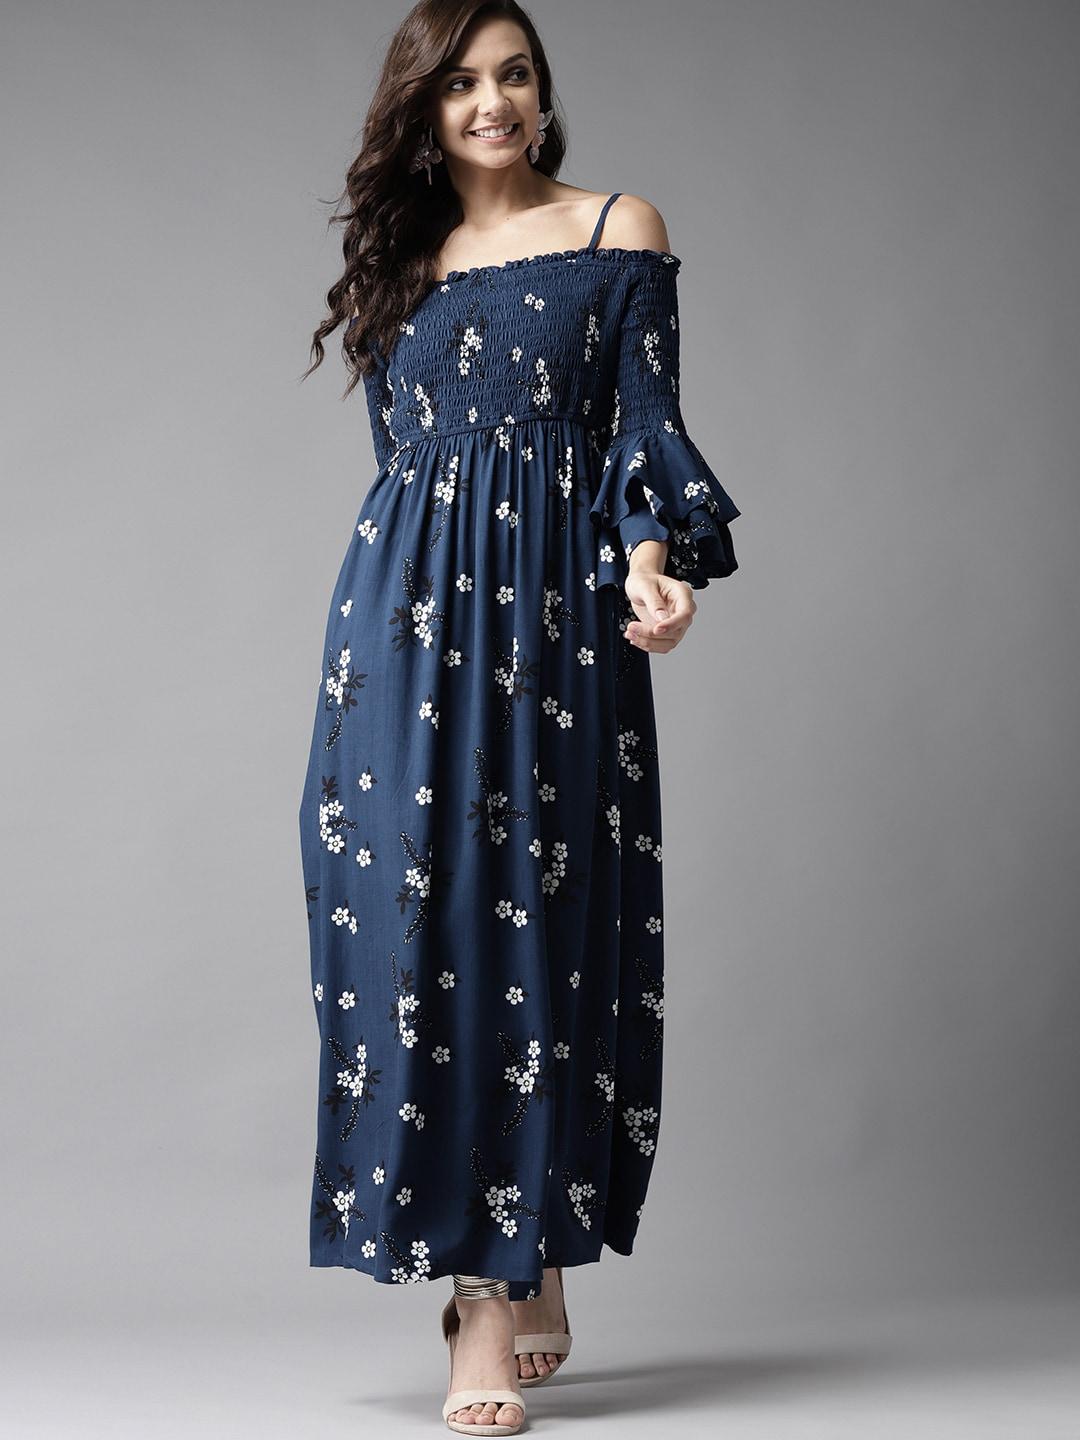 HERE&NOW Navy Blue & White Floral Printed Off-Shoulder Maxi Dress